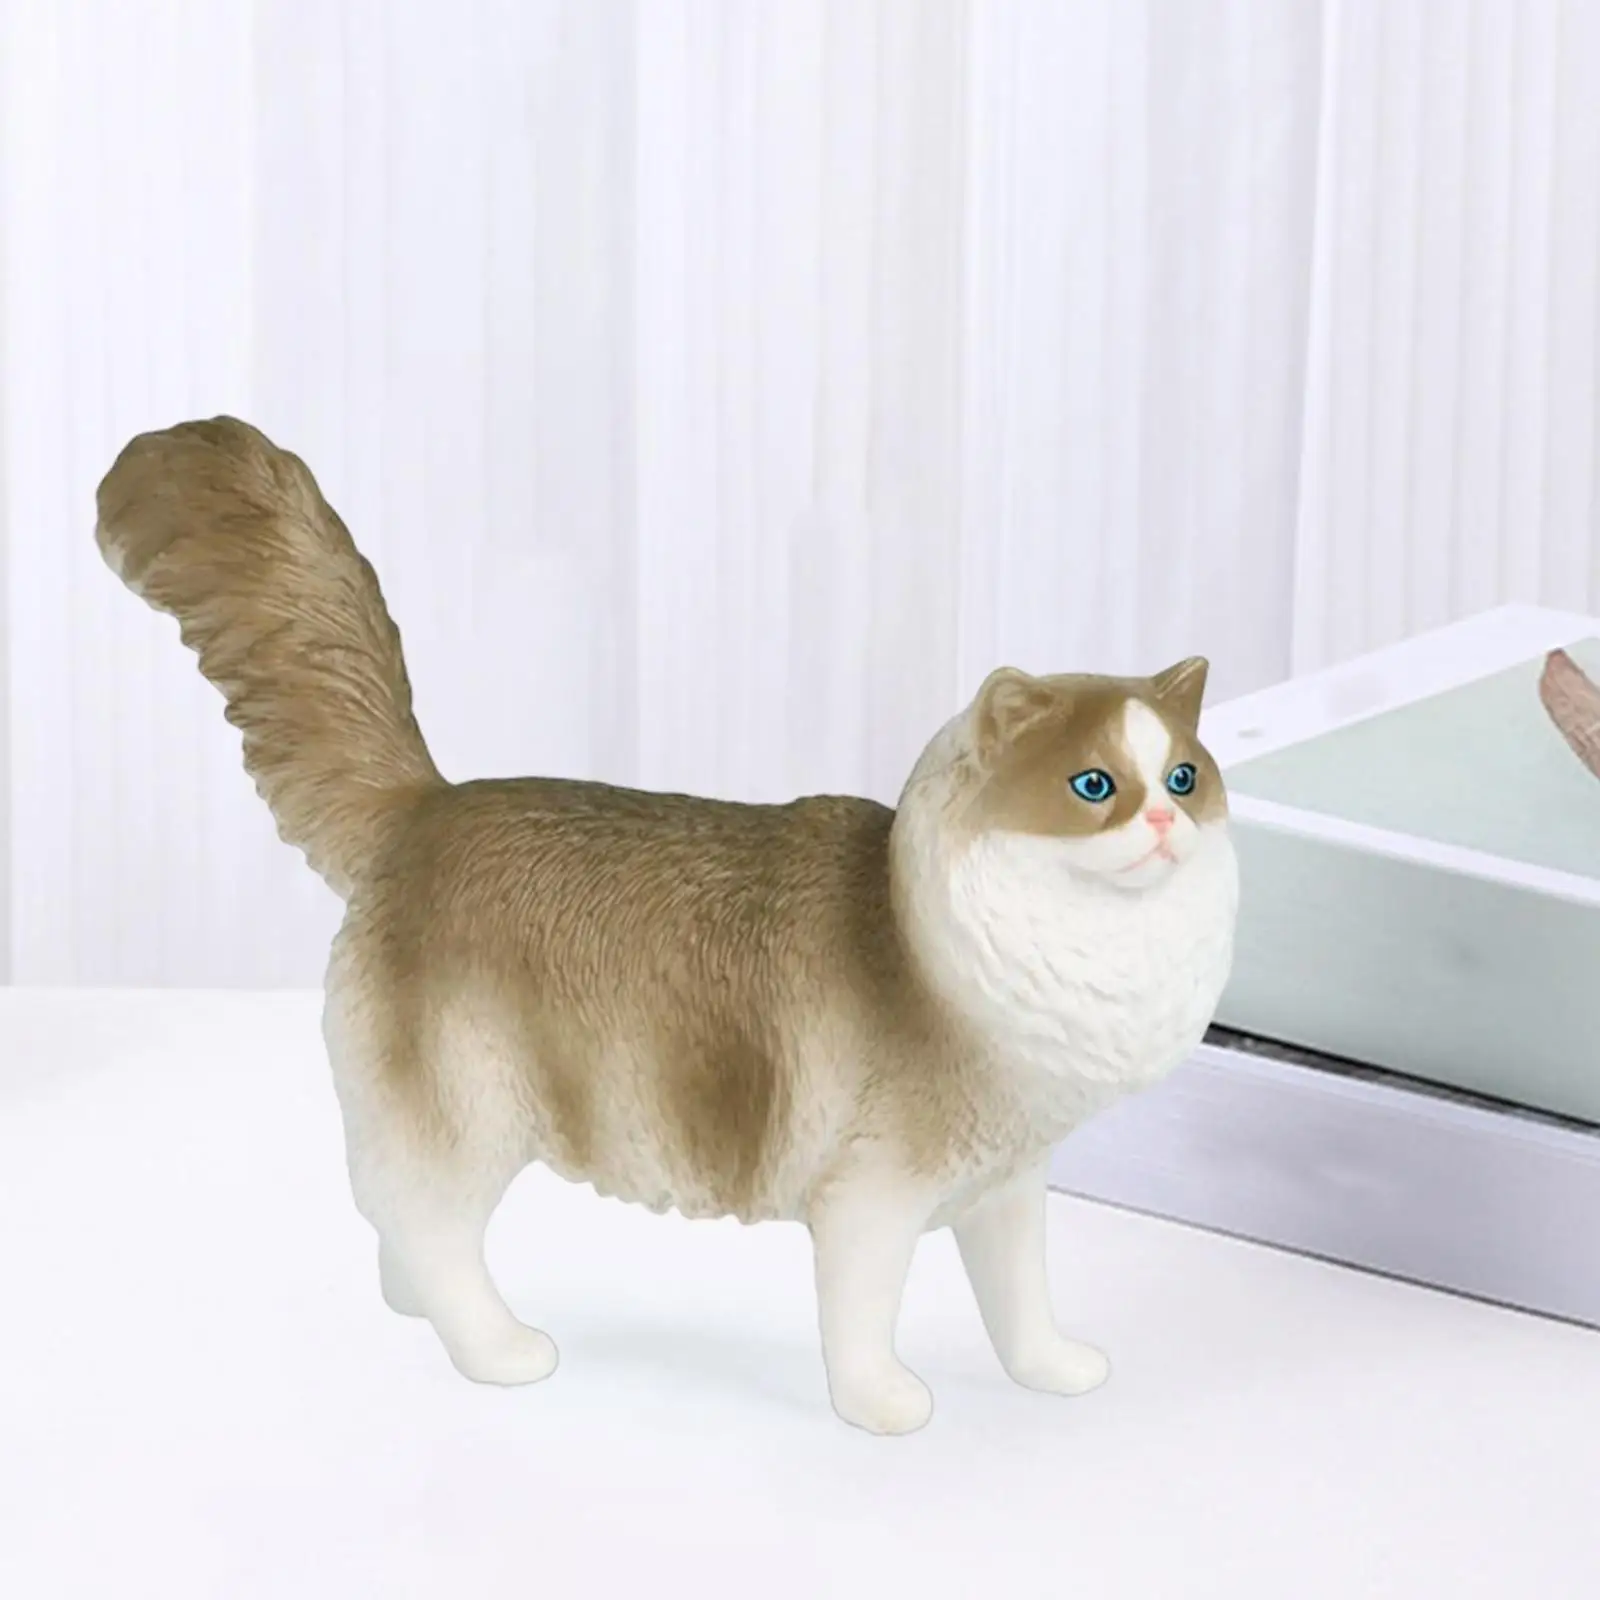 Simulation Cat Model Figurine Small Cat Figures Toy, Collection Playset Educational Toys for Decor Landscape Housewarming Gifts